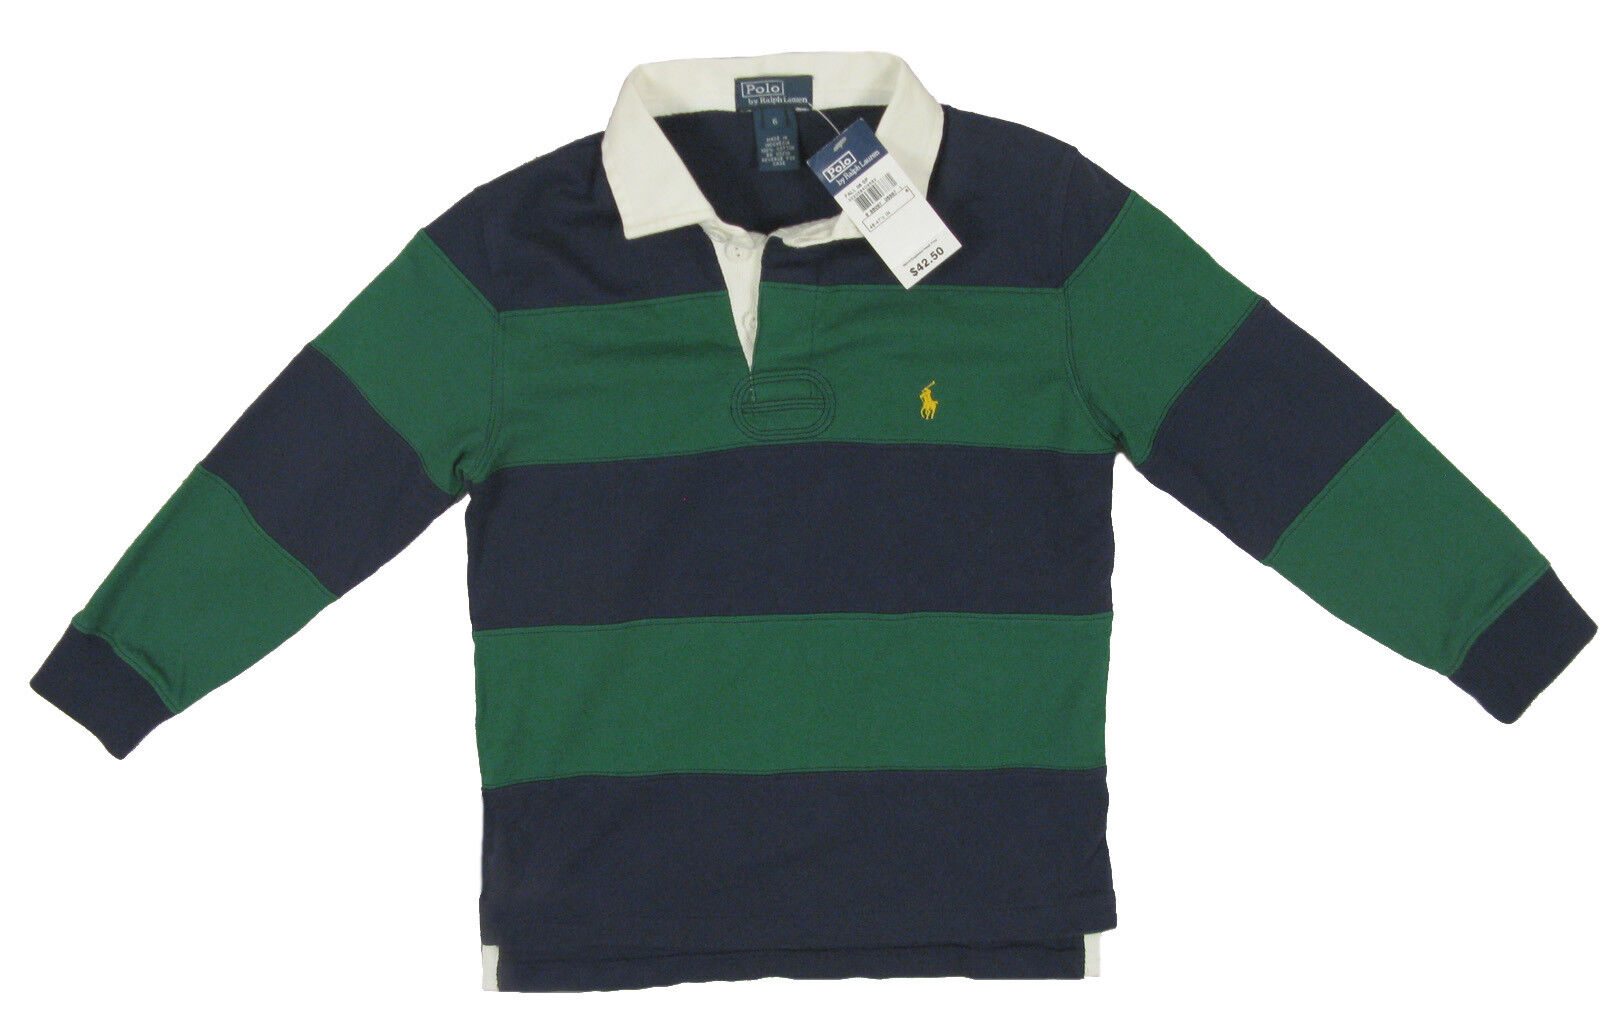 New Polo Ralph Lauren Little Boys Rugby, Navy And Green Rugby Shirt